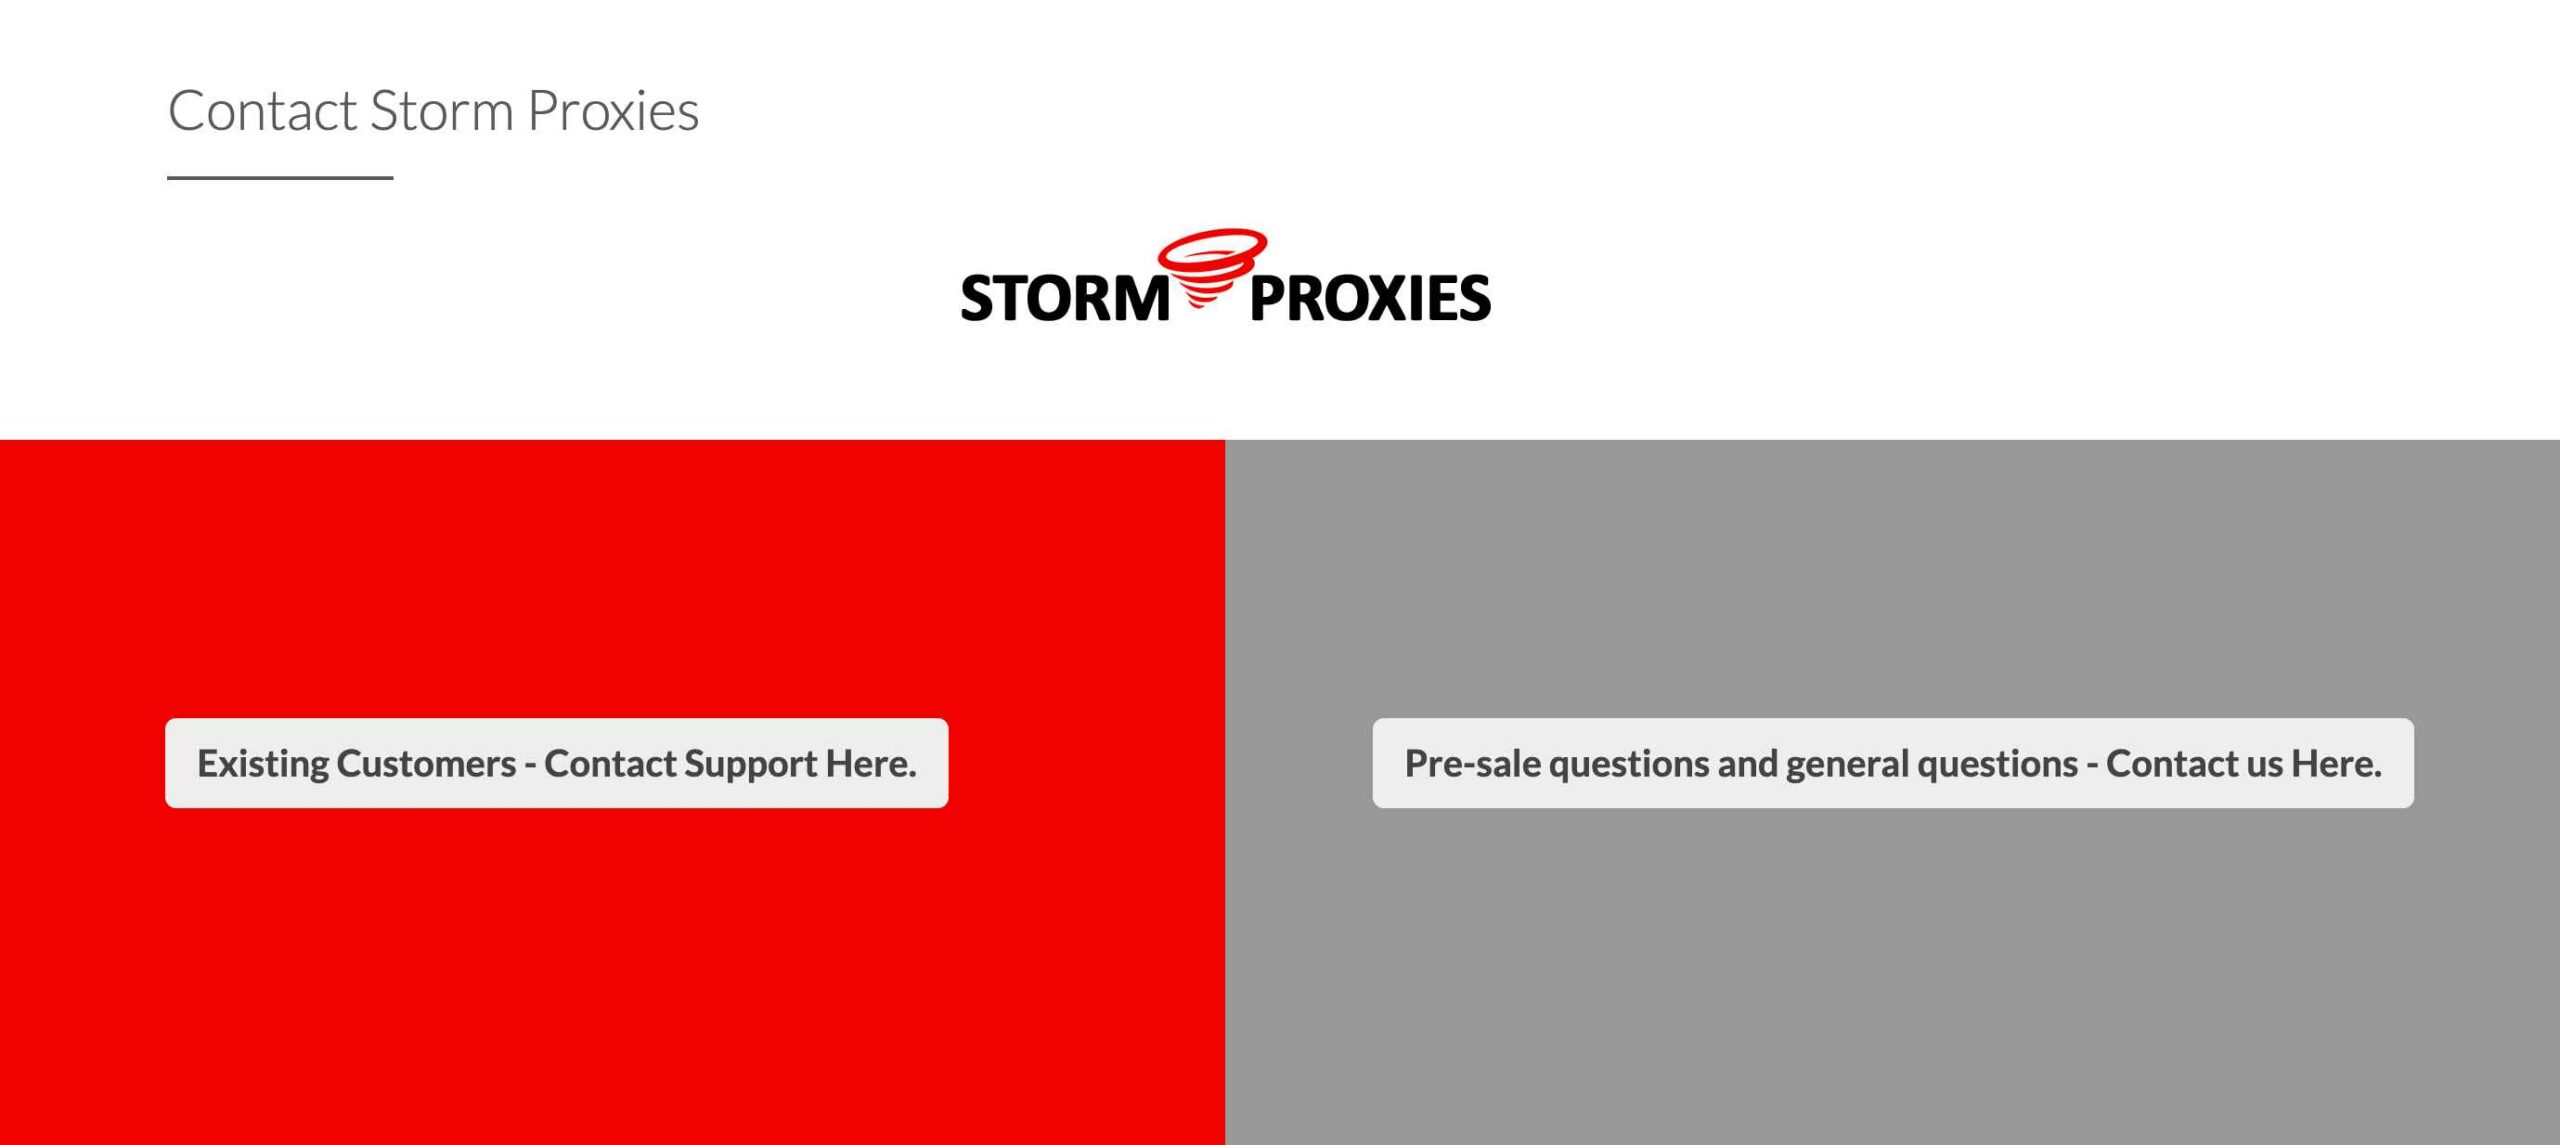 Customer Support offered by Stormproxies